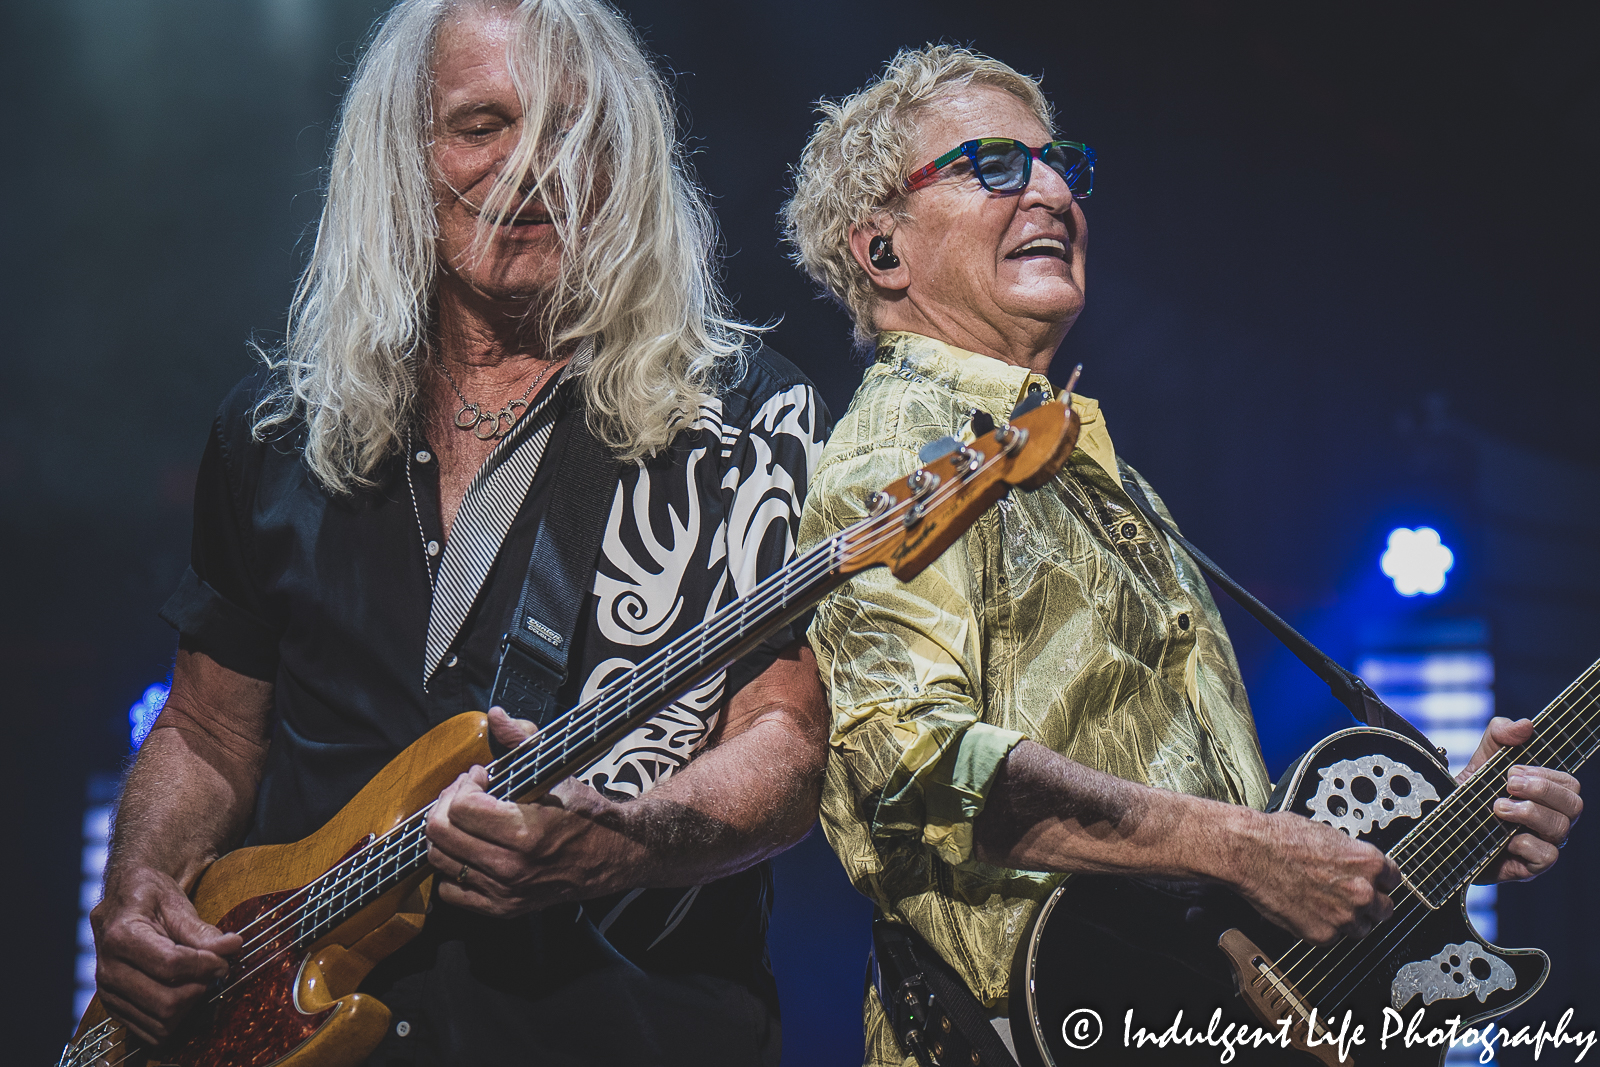 REO Speedwagon bass player Bruce Hall performing with frontman and guitarist Kevin Cronin at Starlight Theatre in Kansas City, MO on June 14, 2022.